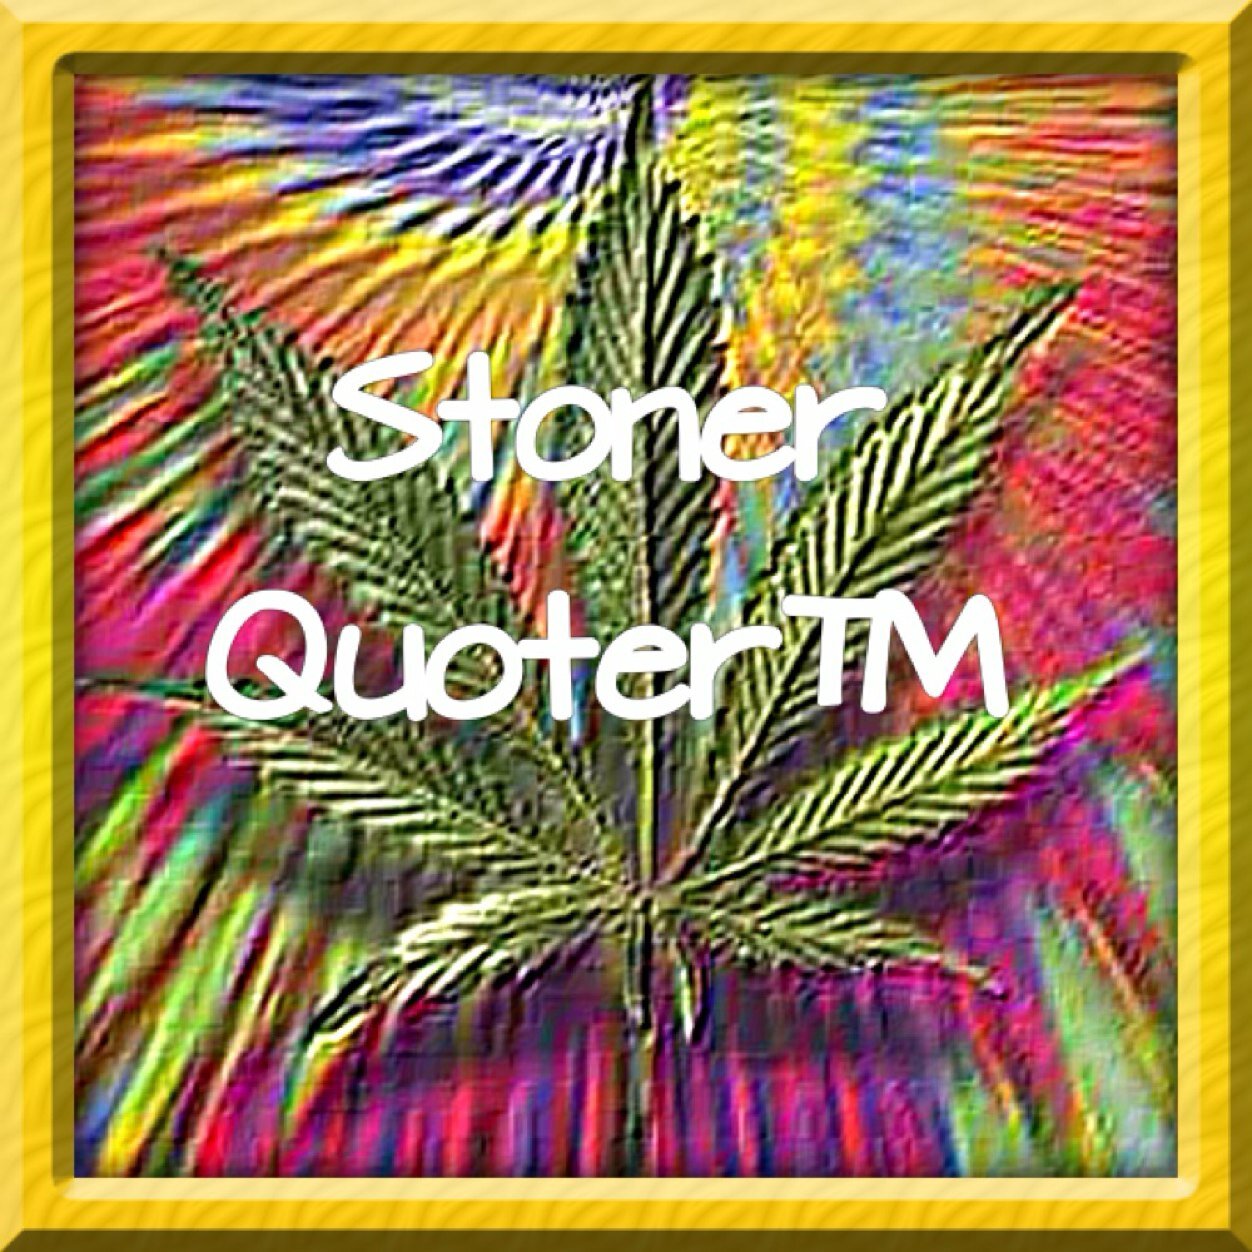 Shout out to the stoners and the stoners only. #StonerNation #StayTrippy #StonersStayTrippy #Clound9 #ChillNation #420 #MaryJ